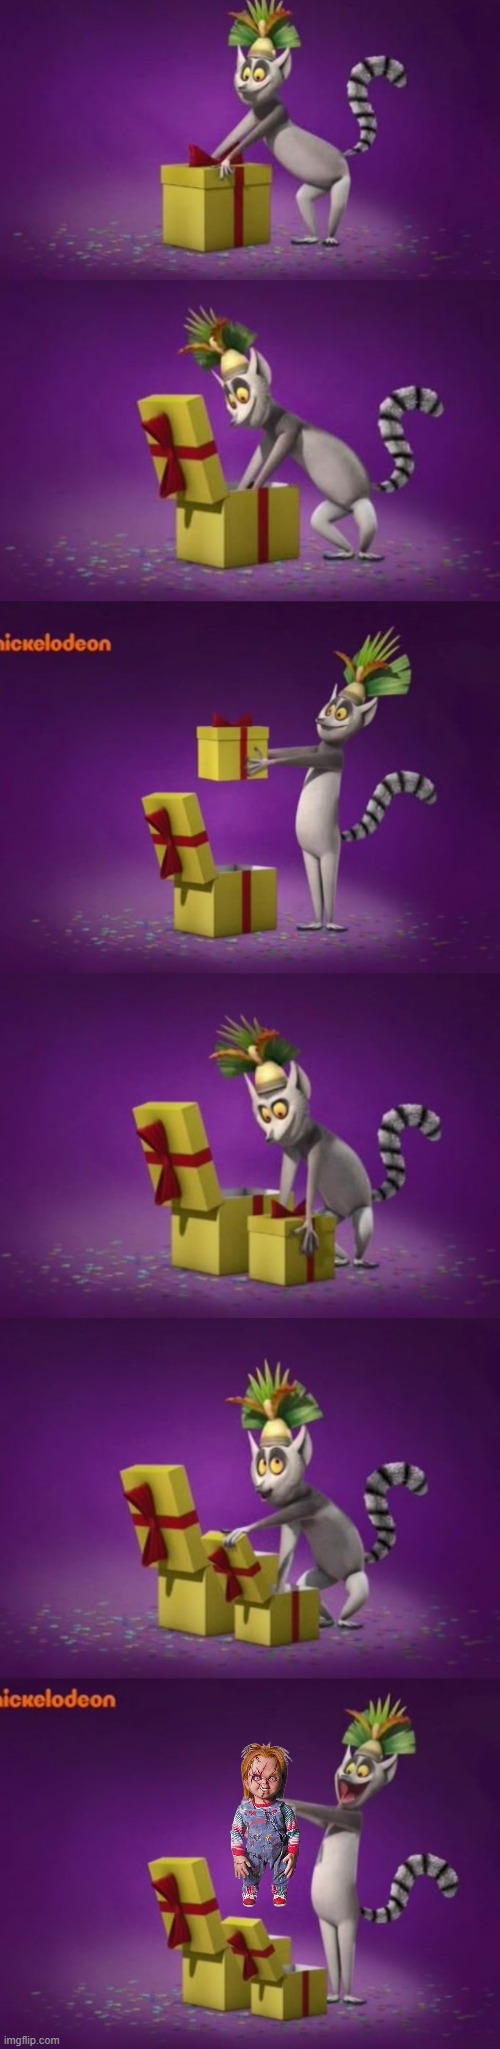 don't open the box king julien | image tagged in king julian unboxing present in his mind,chucky | made w/ Imgflip meme maker